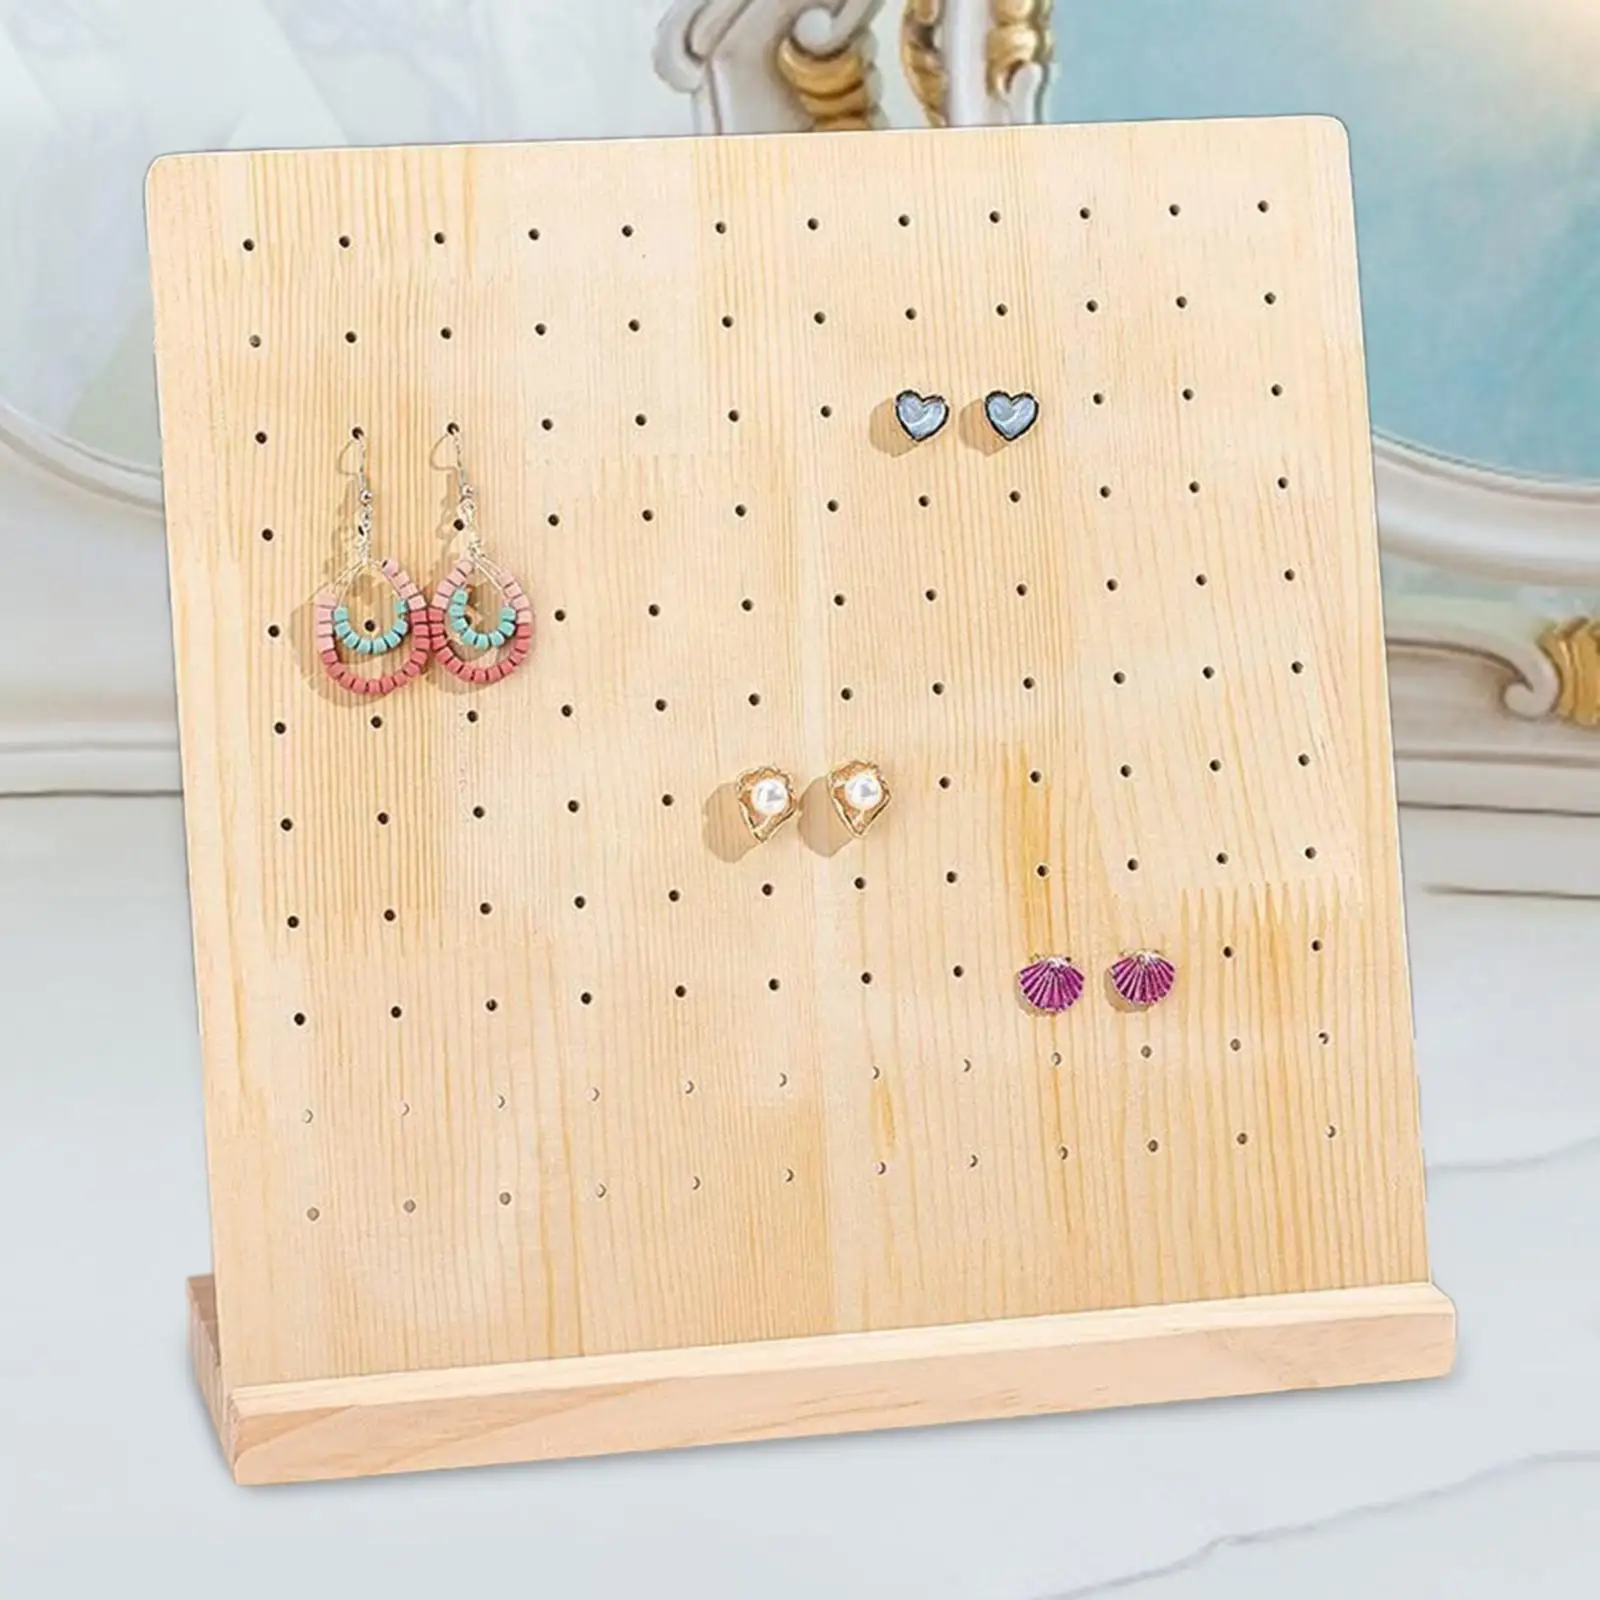 Wooden Pegboard Display Stand Retail Rack, Jewellery Display Rack Organizer for Selling Personal Usage, Craft Shows